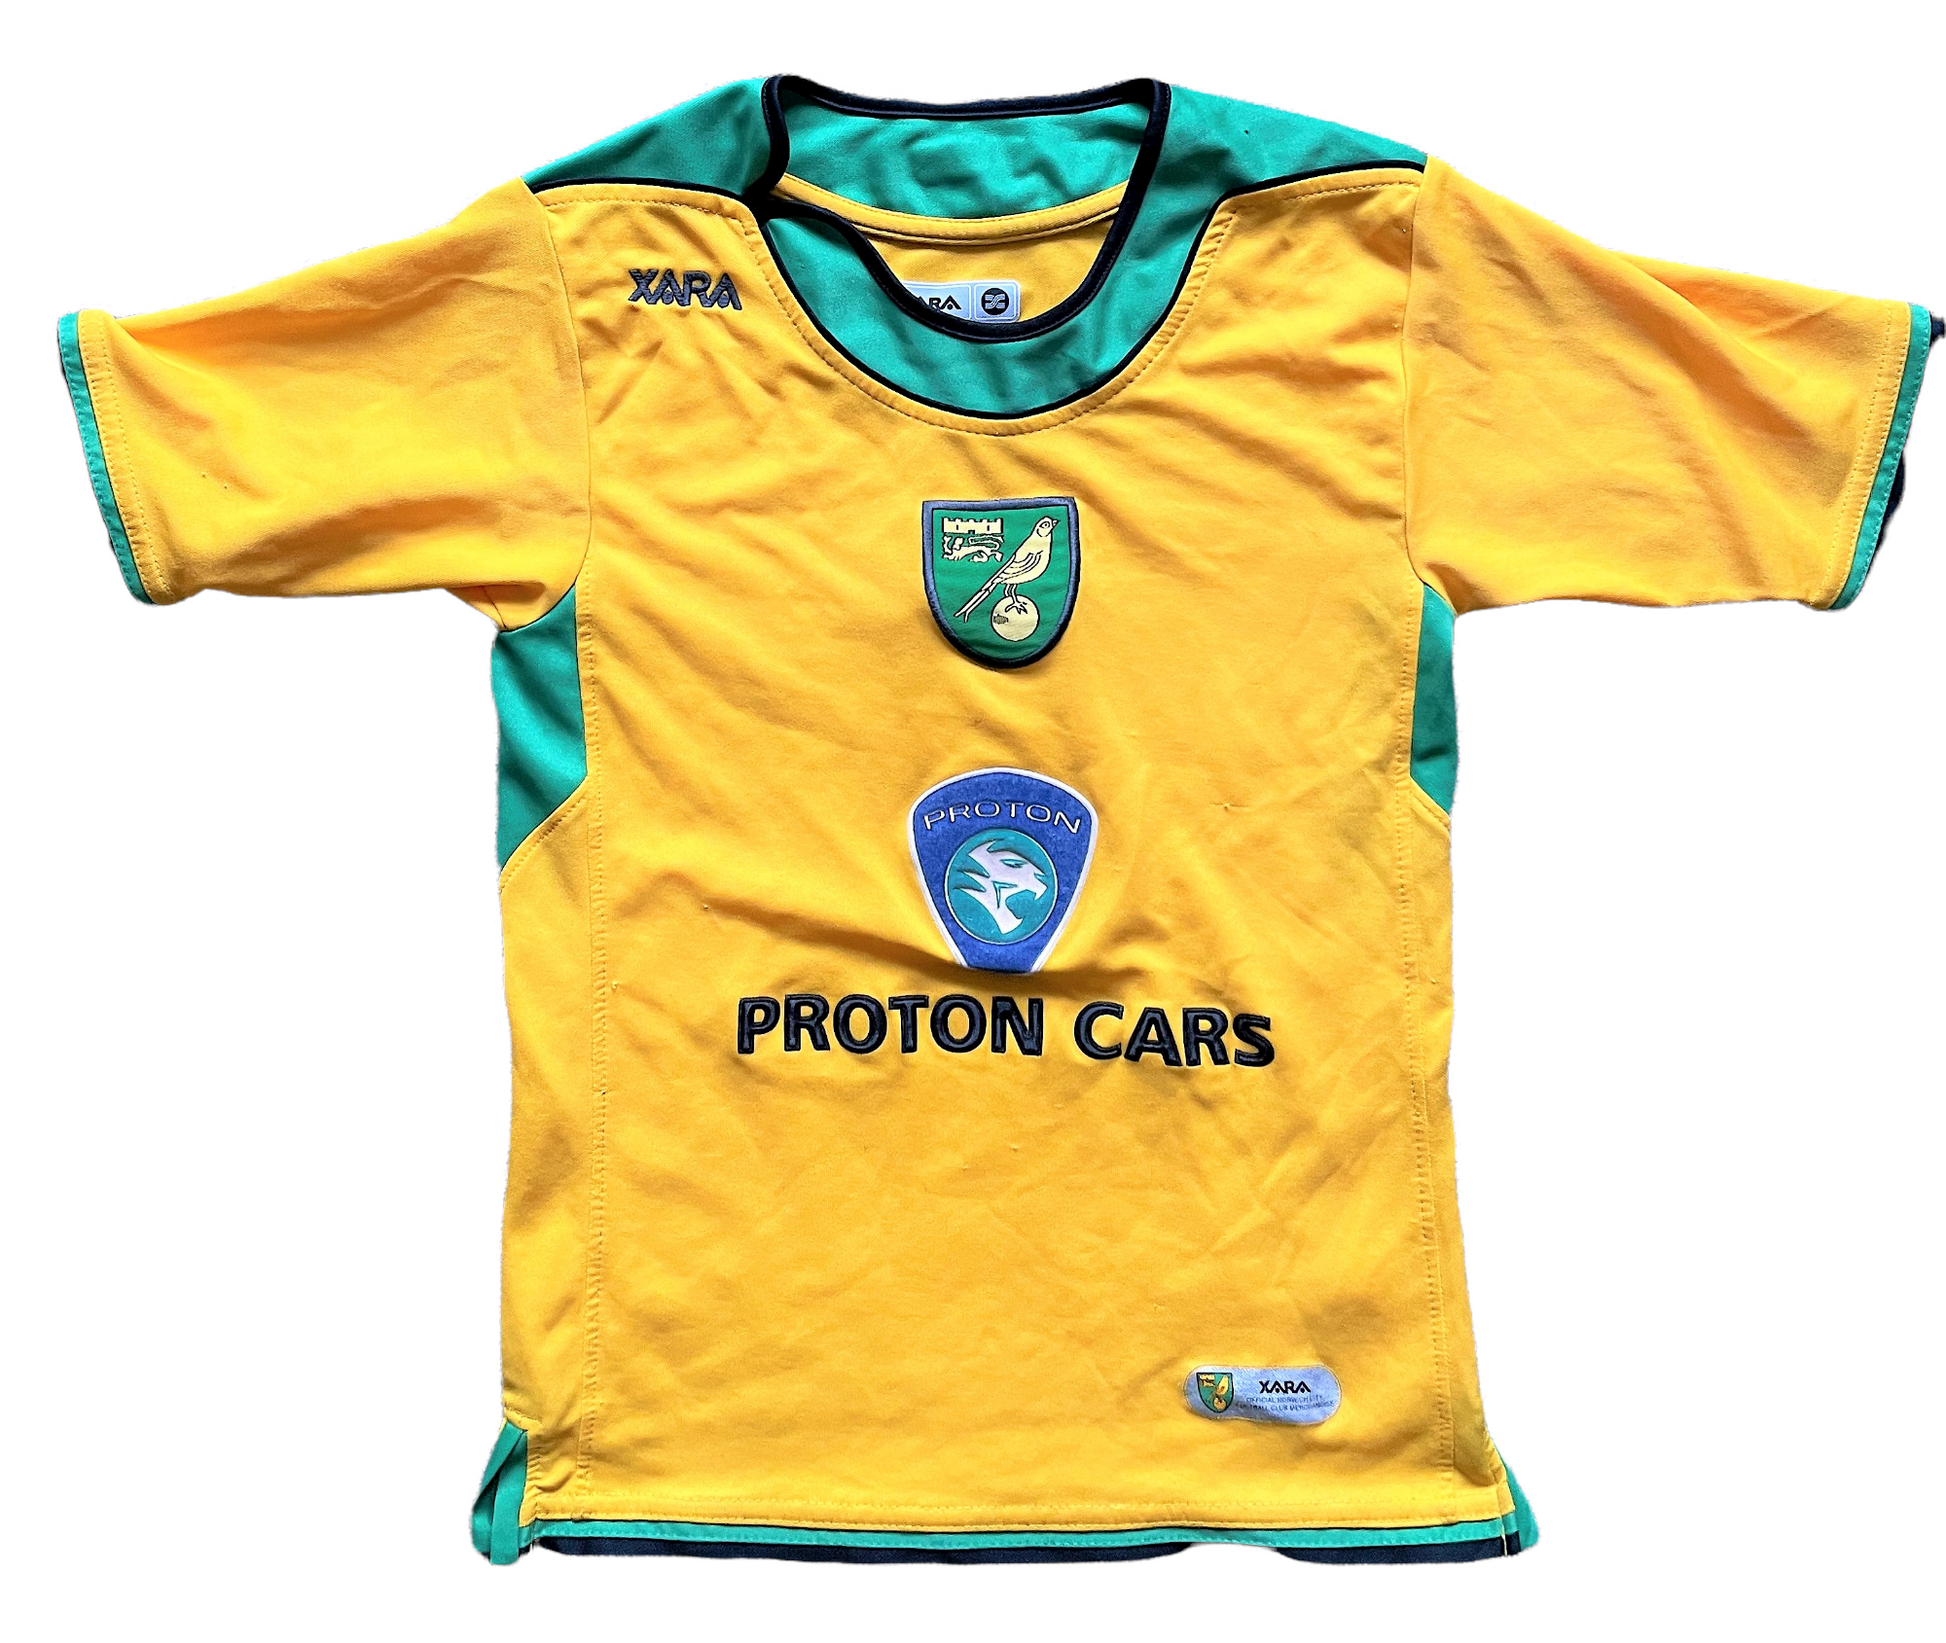 2005-06 Norwich City Home Shirt (average) Youths Small